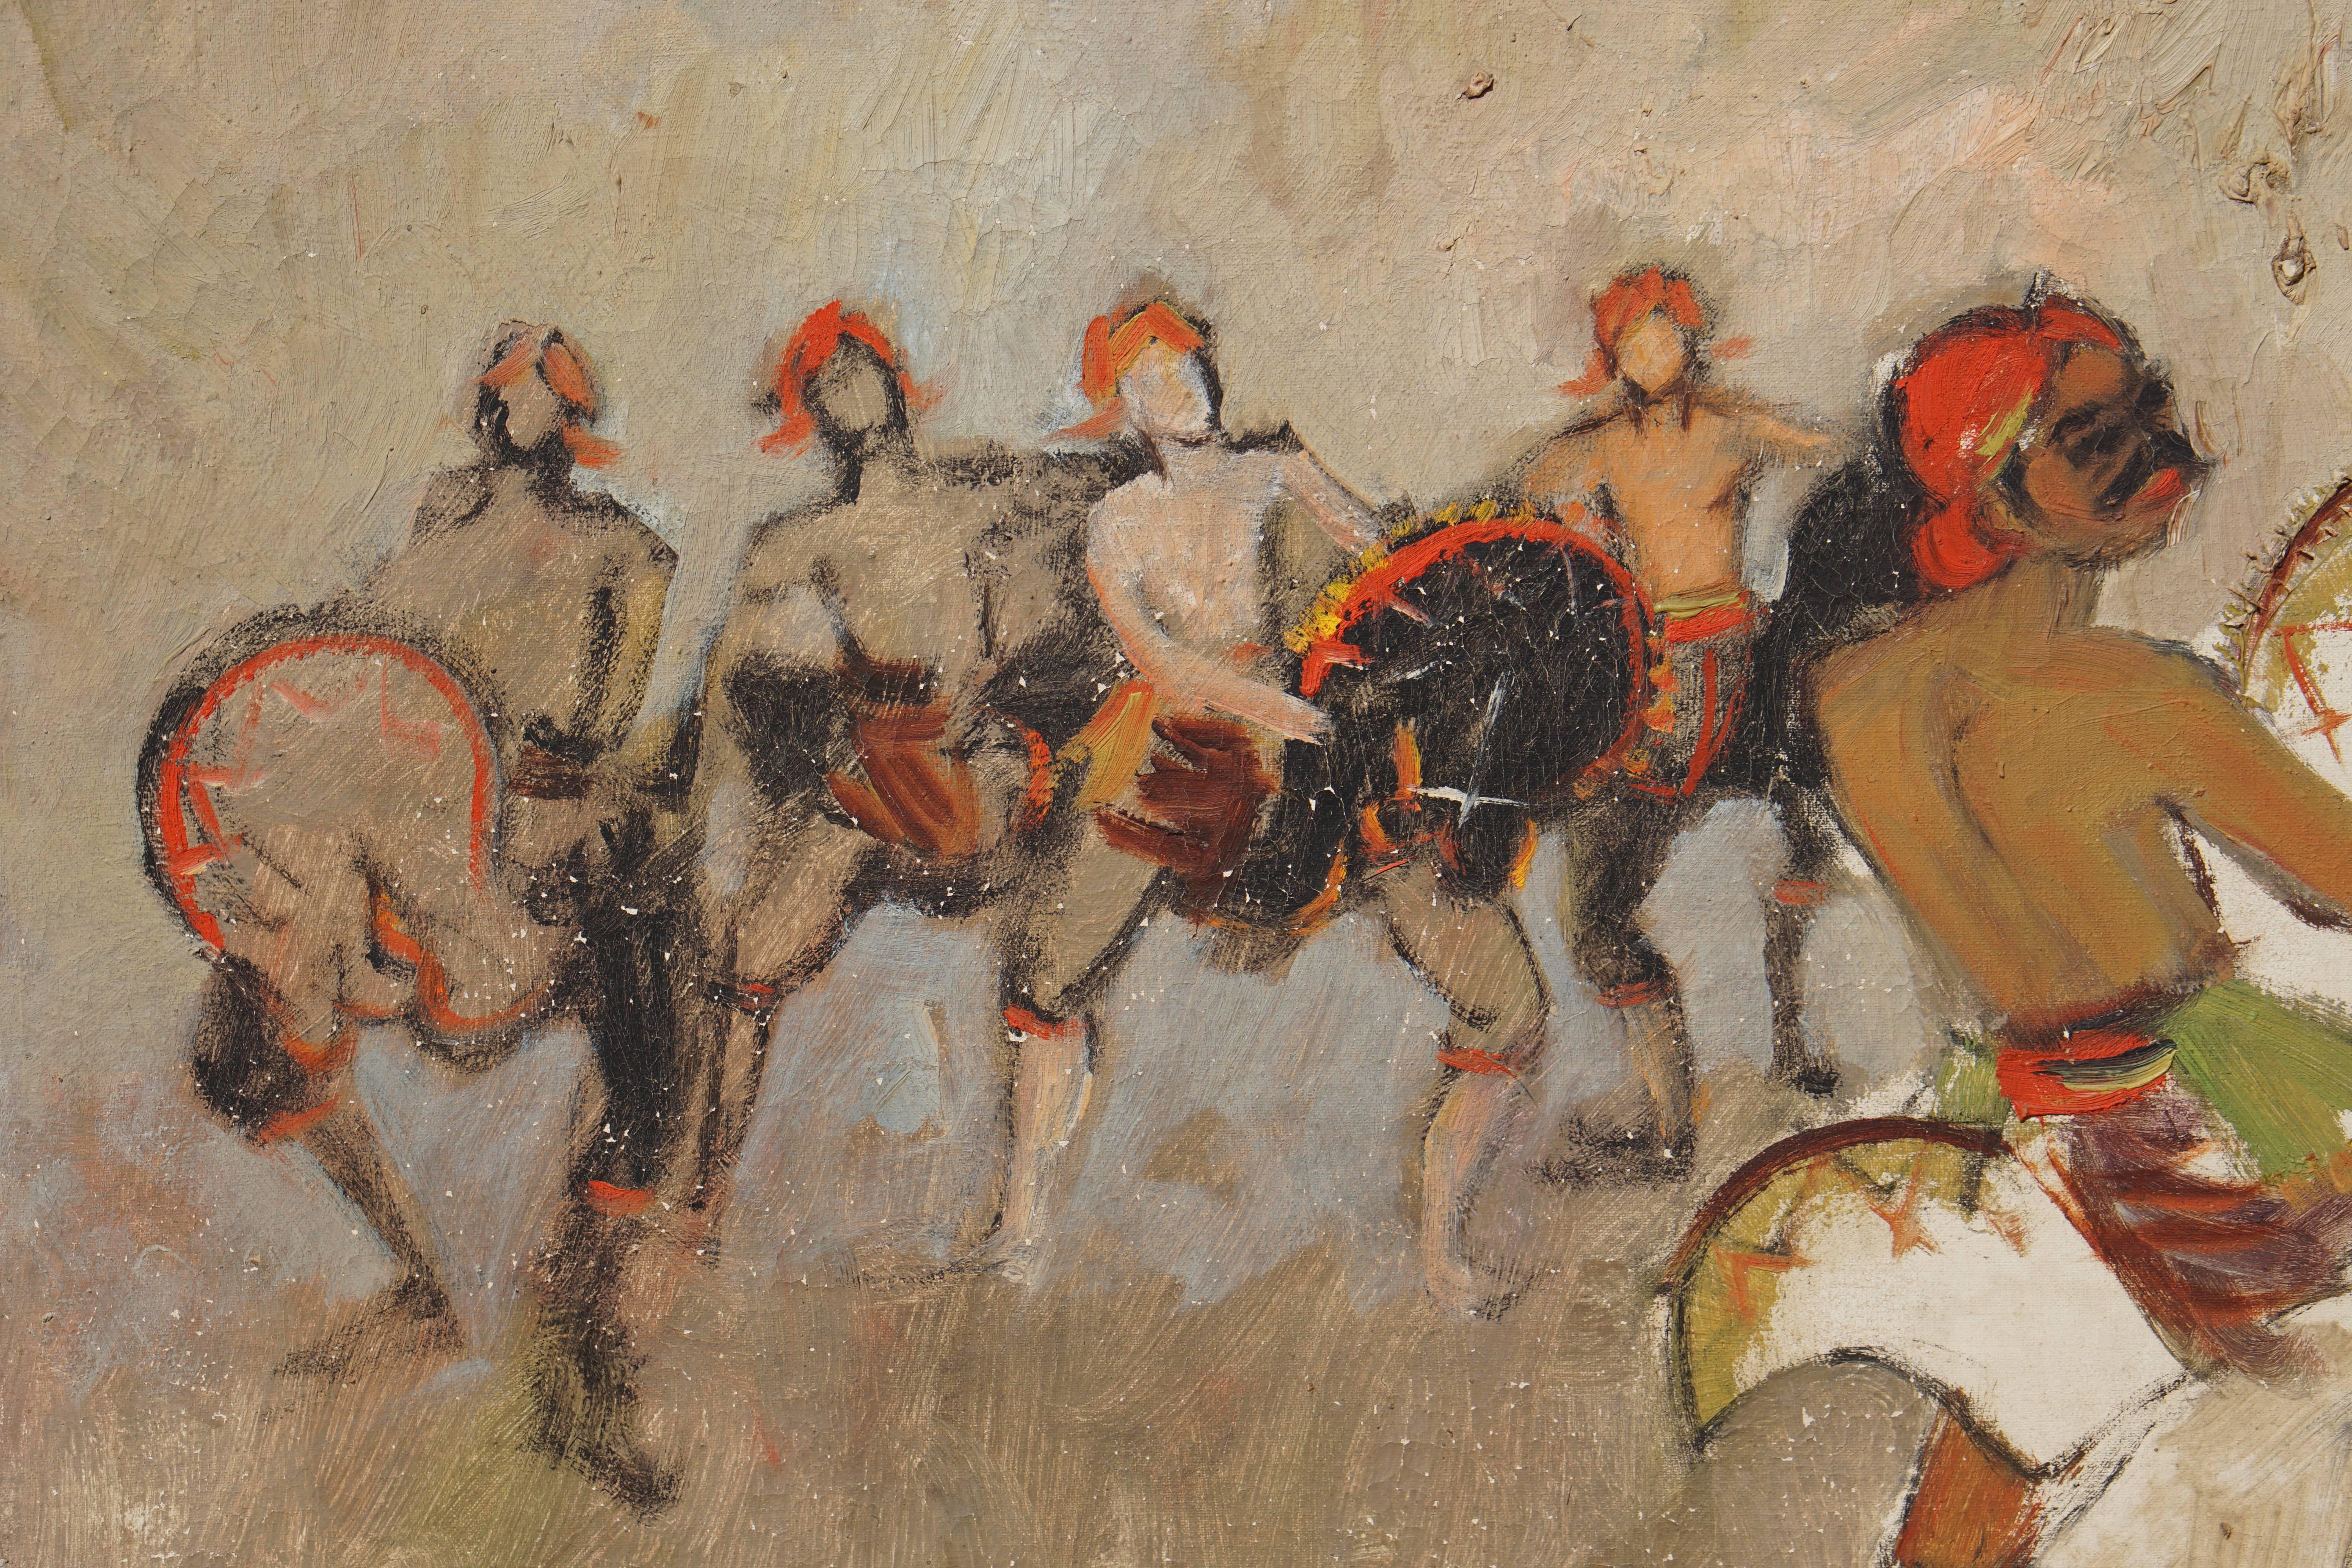 Indonesian Dancers Painting by Bagong Kussudiardja, Indonesia, 1950s For Sale